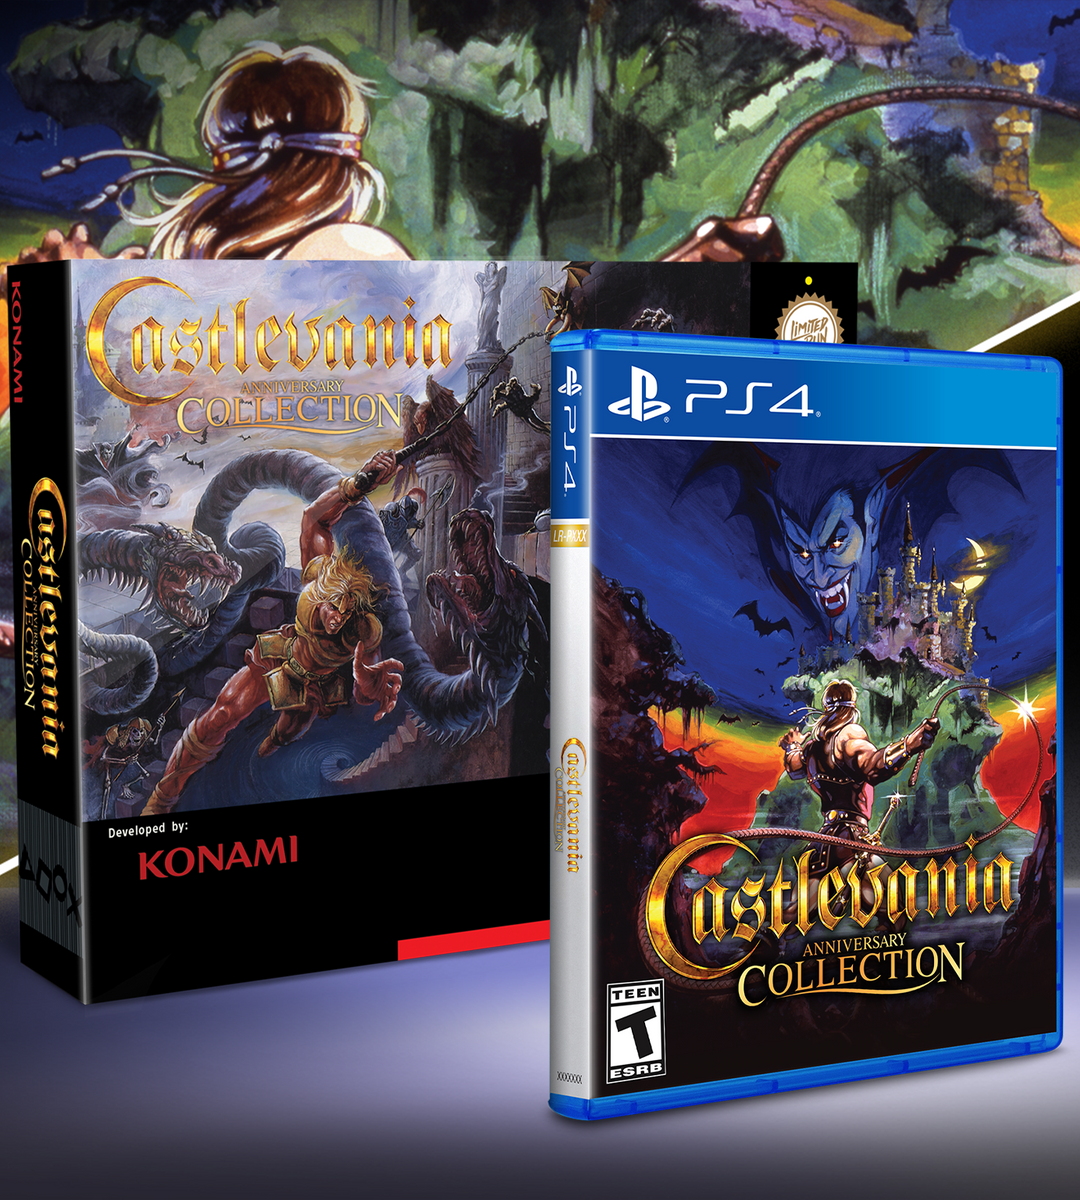 Limited Run #405: Castlevania Anniversary Collection Ultimate